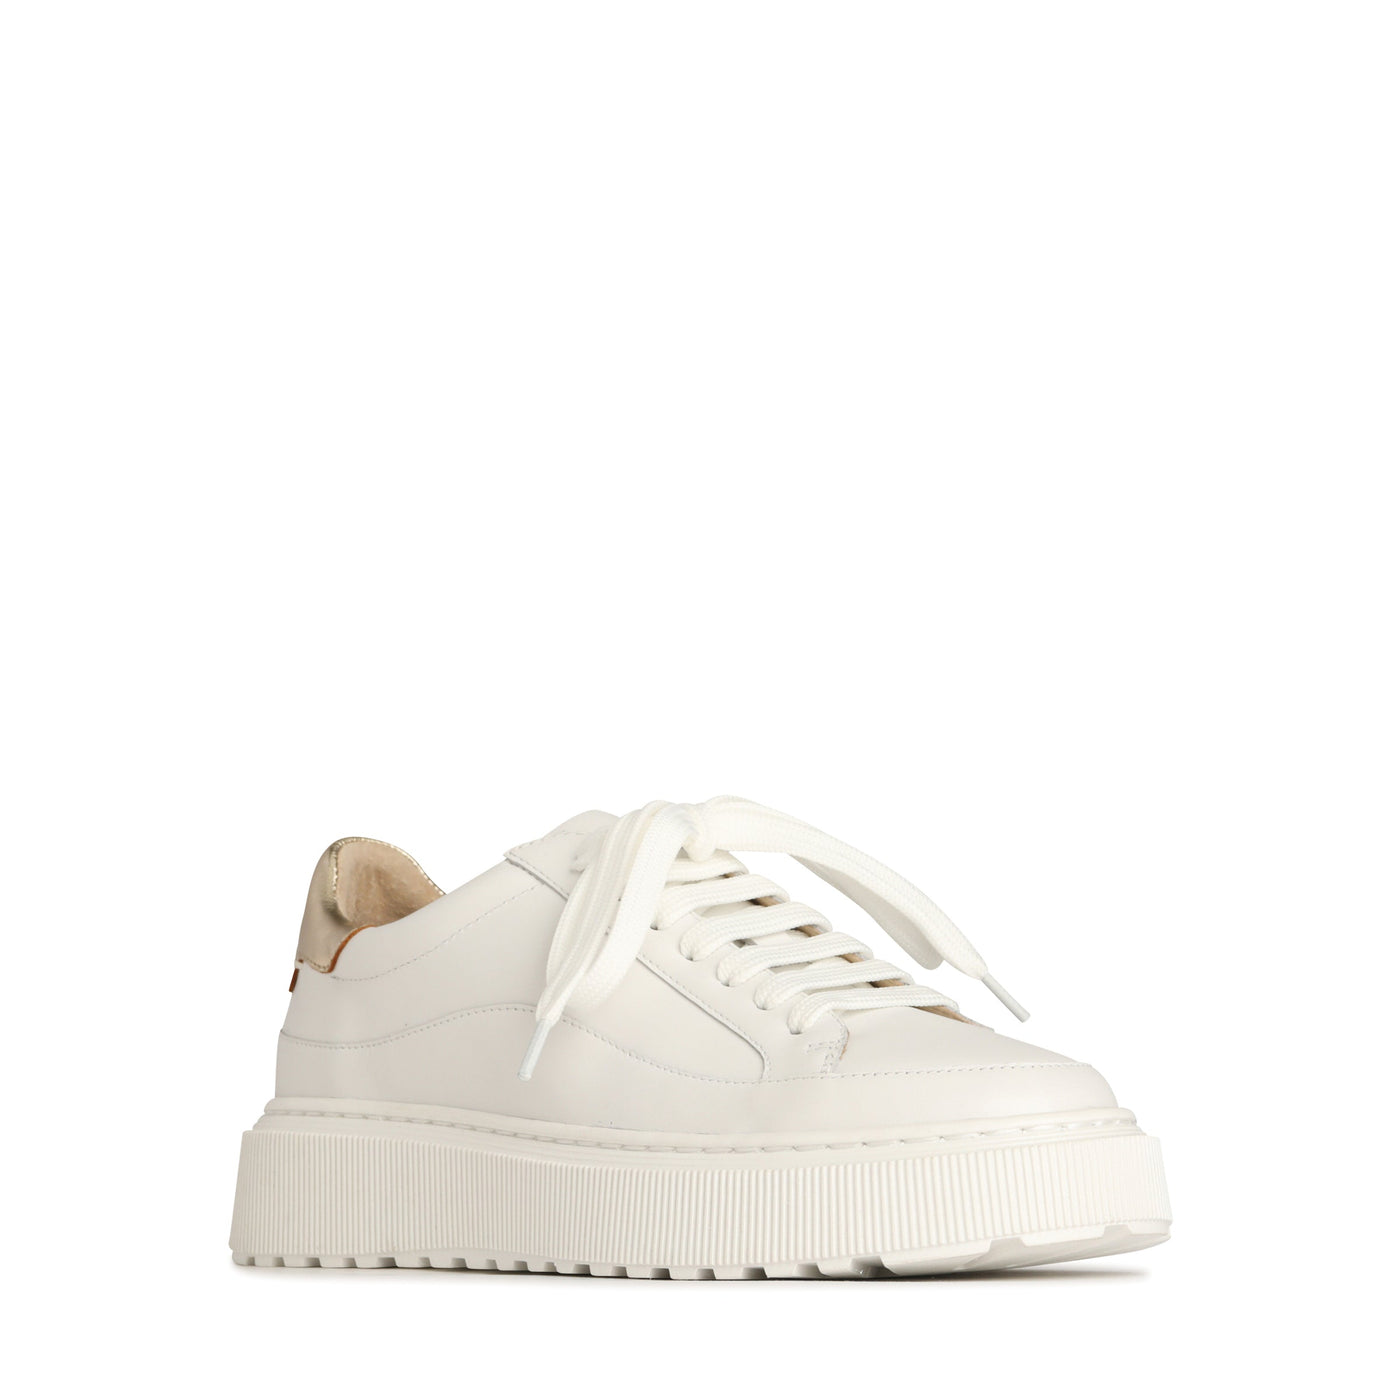 EOS LAELA WHITE CHAMPAGNE - Women sneakers - Collective Shoes 